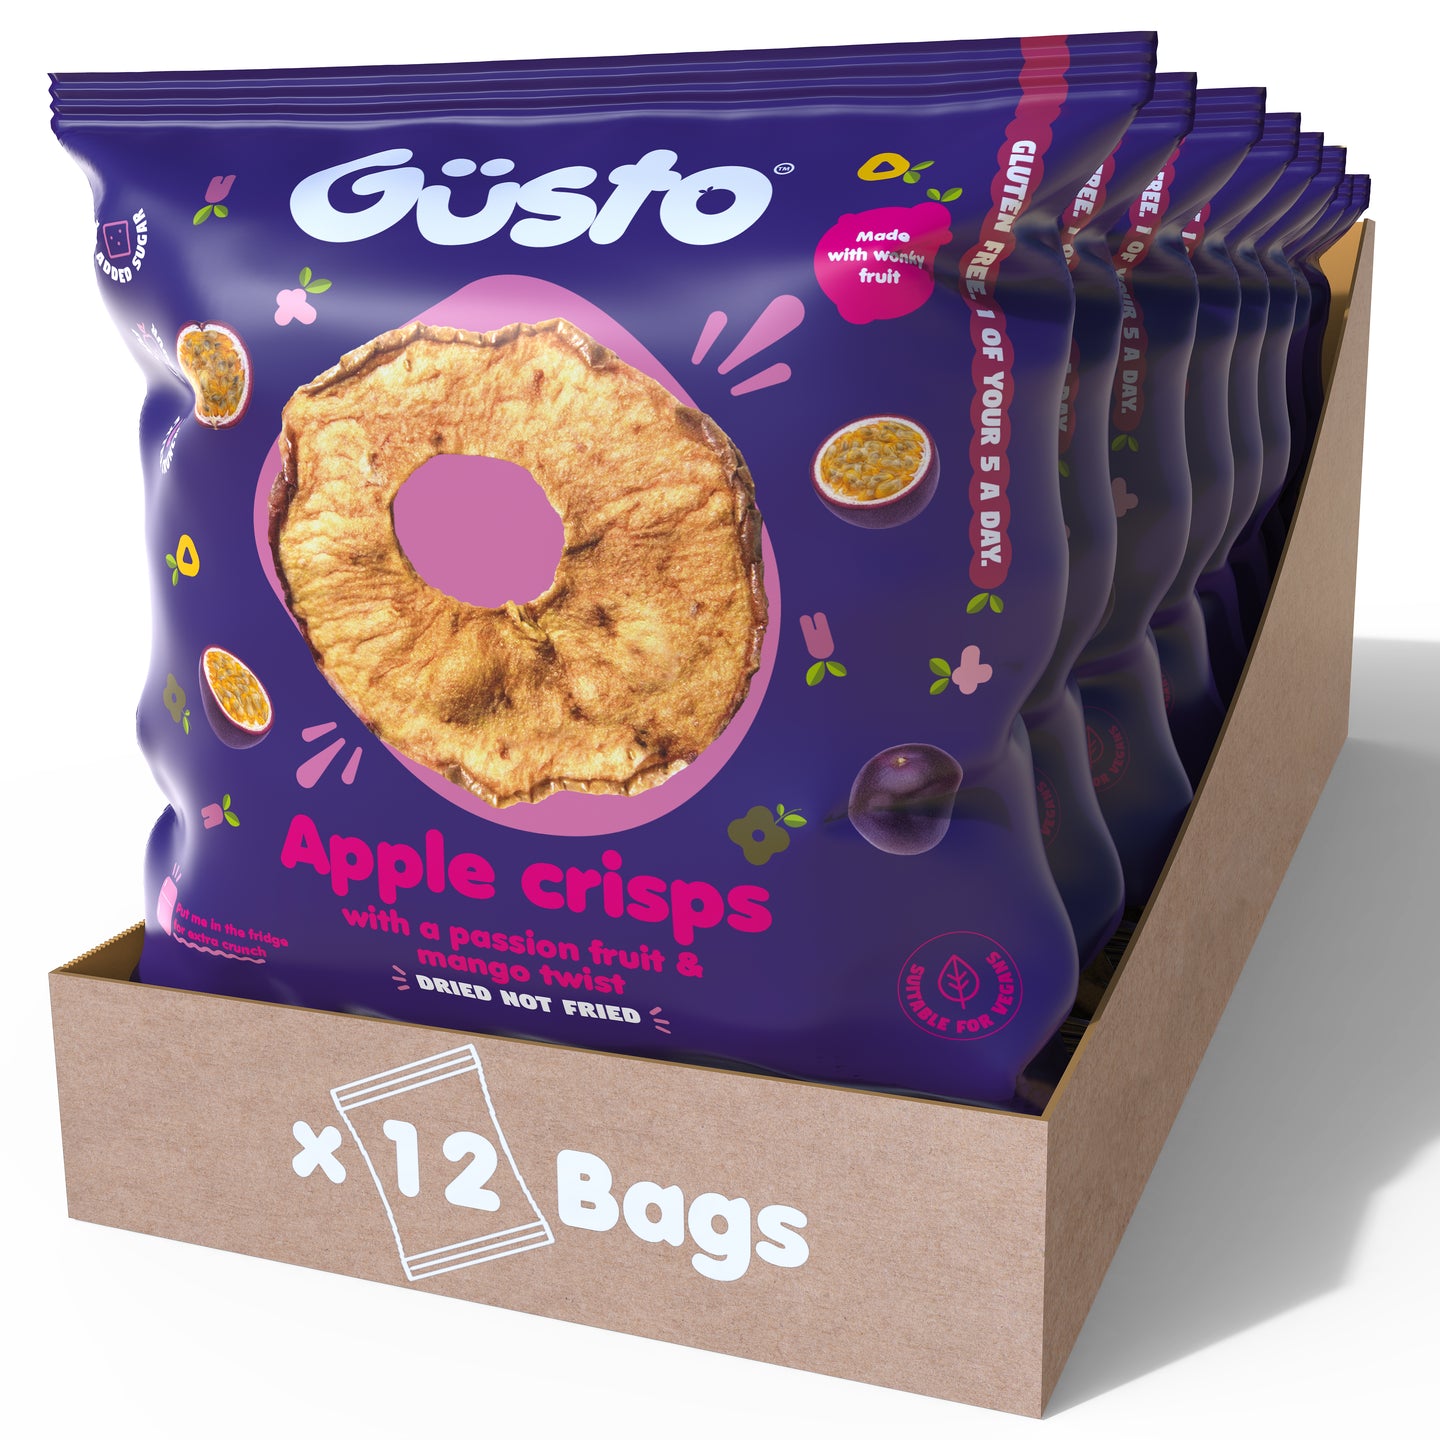 Air-dried apple crisps with a passion fruit & mango twist.